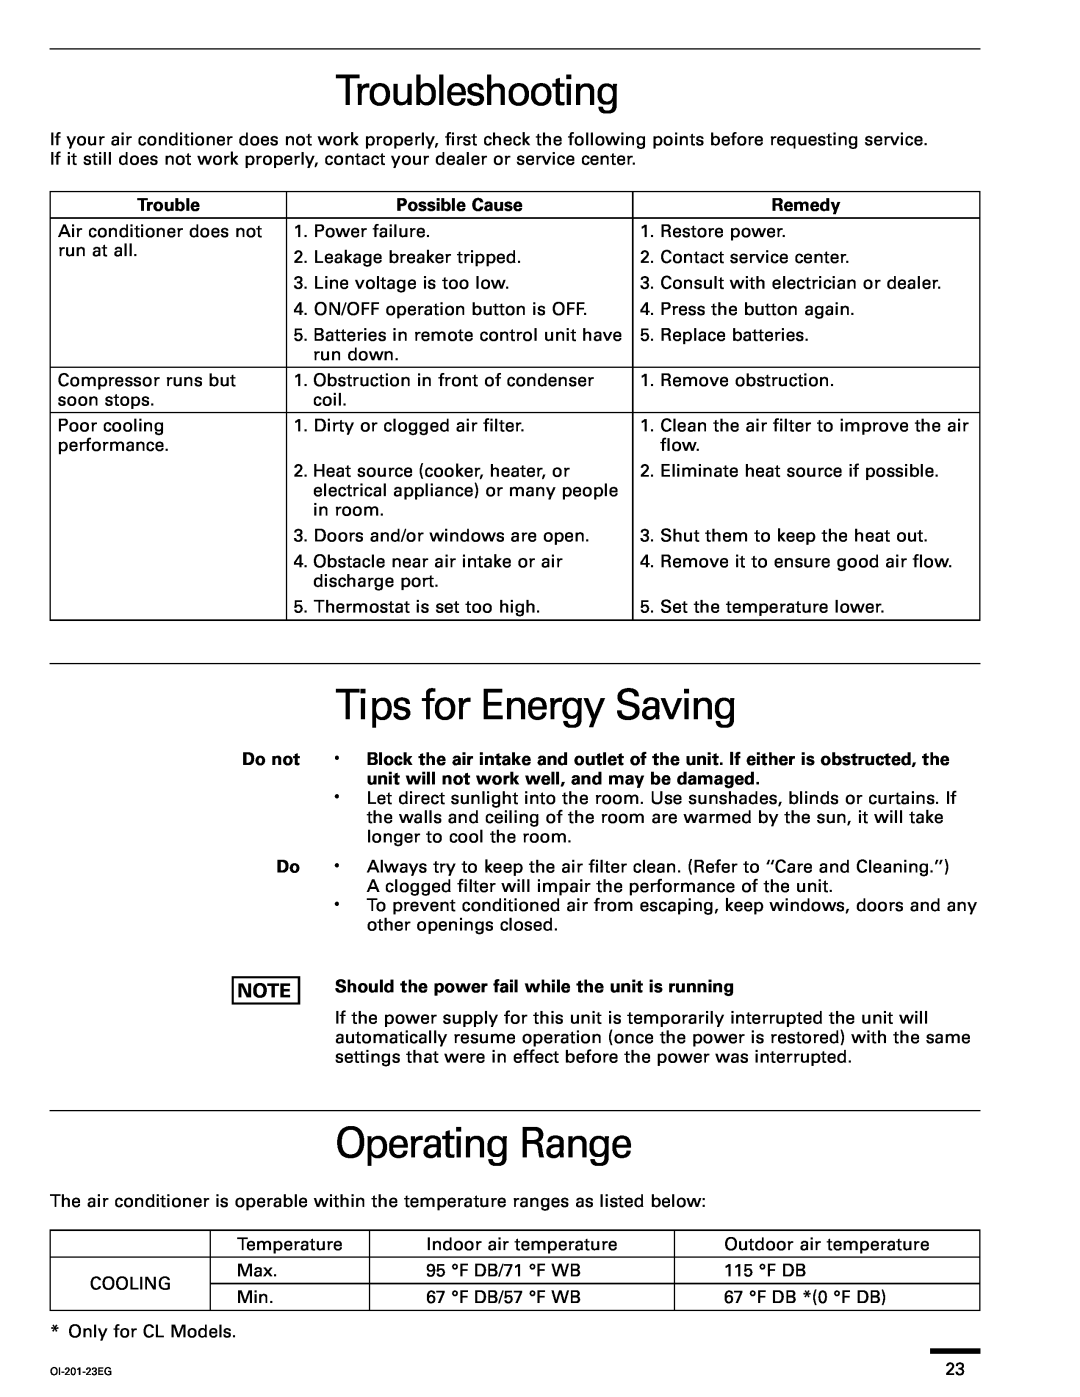 Sanyo XS2432, TS3632, TS2432 Troubleshooting, Tips for Energy Saving, Operating Range, Possible Cause, Remedy, Do not Do 